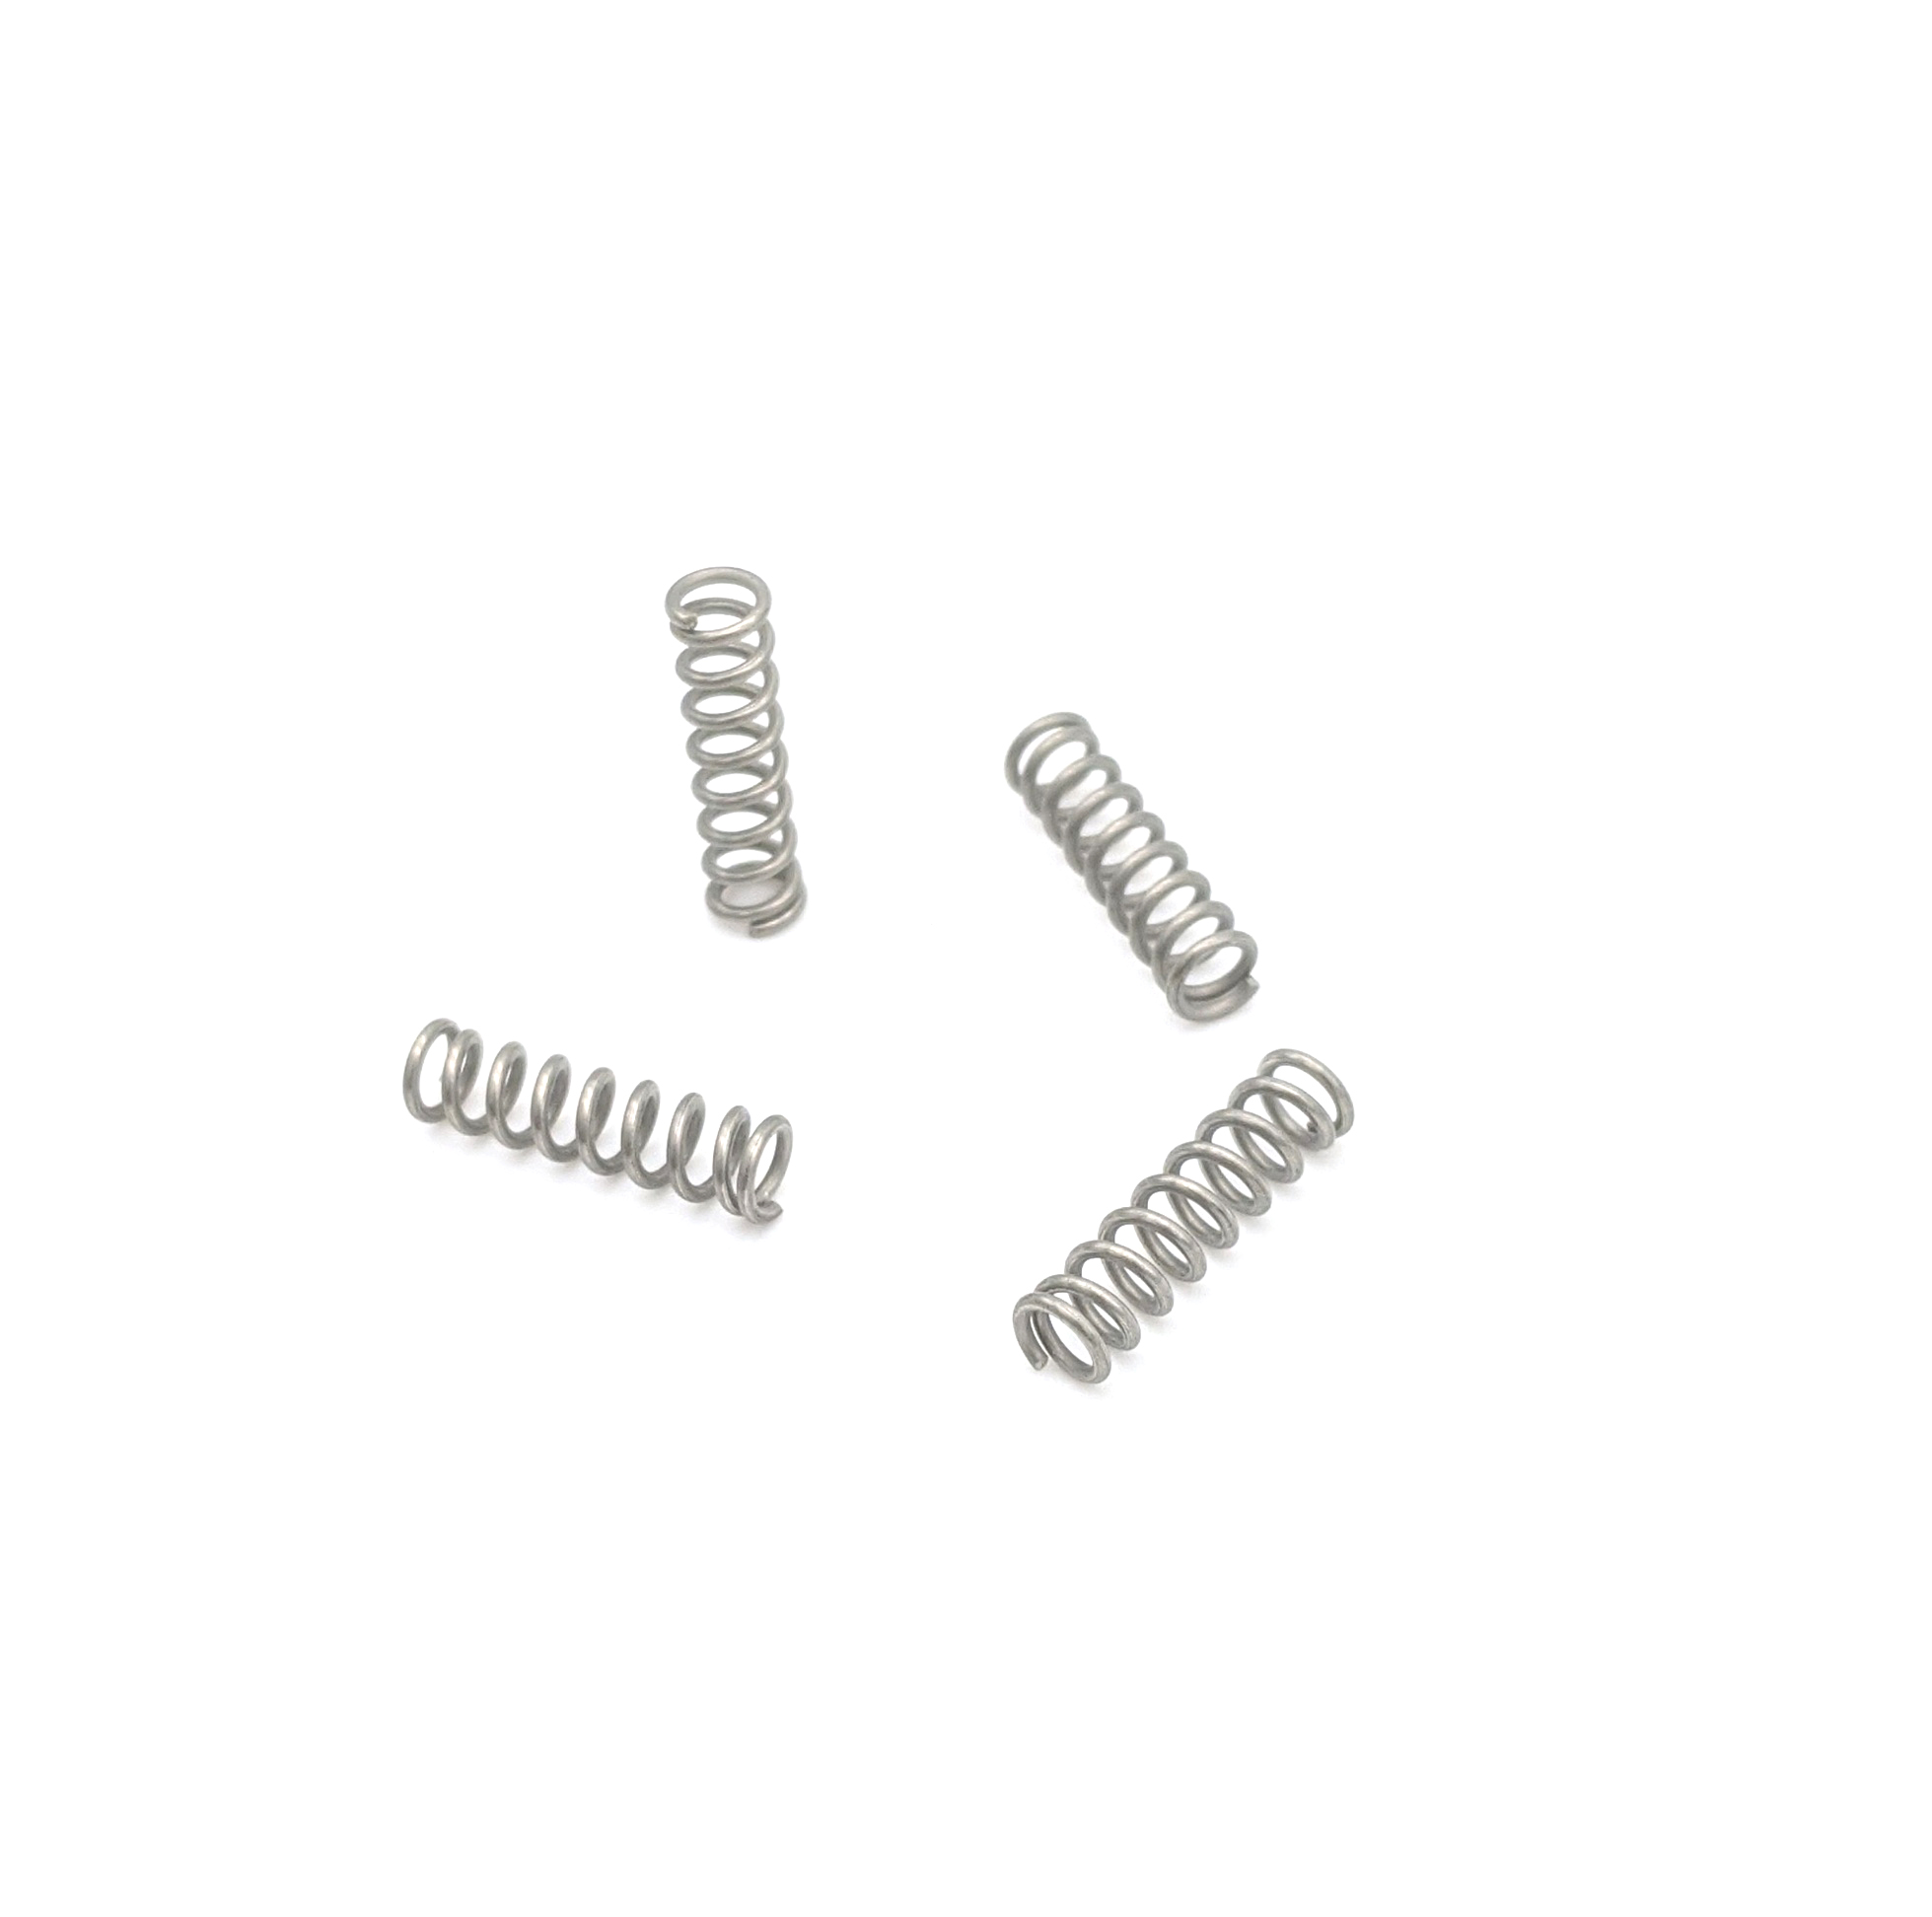 CENG stainless steel compression springs